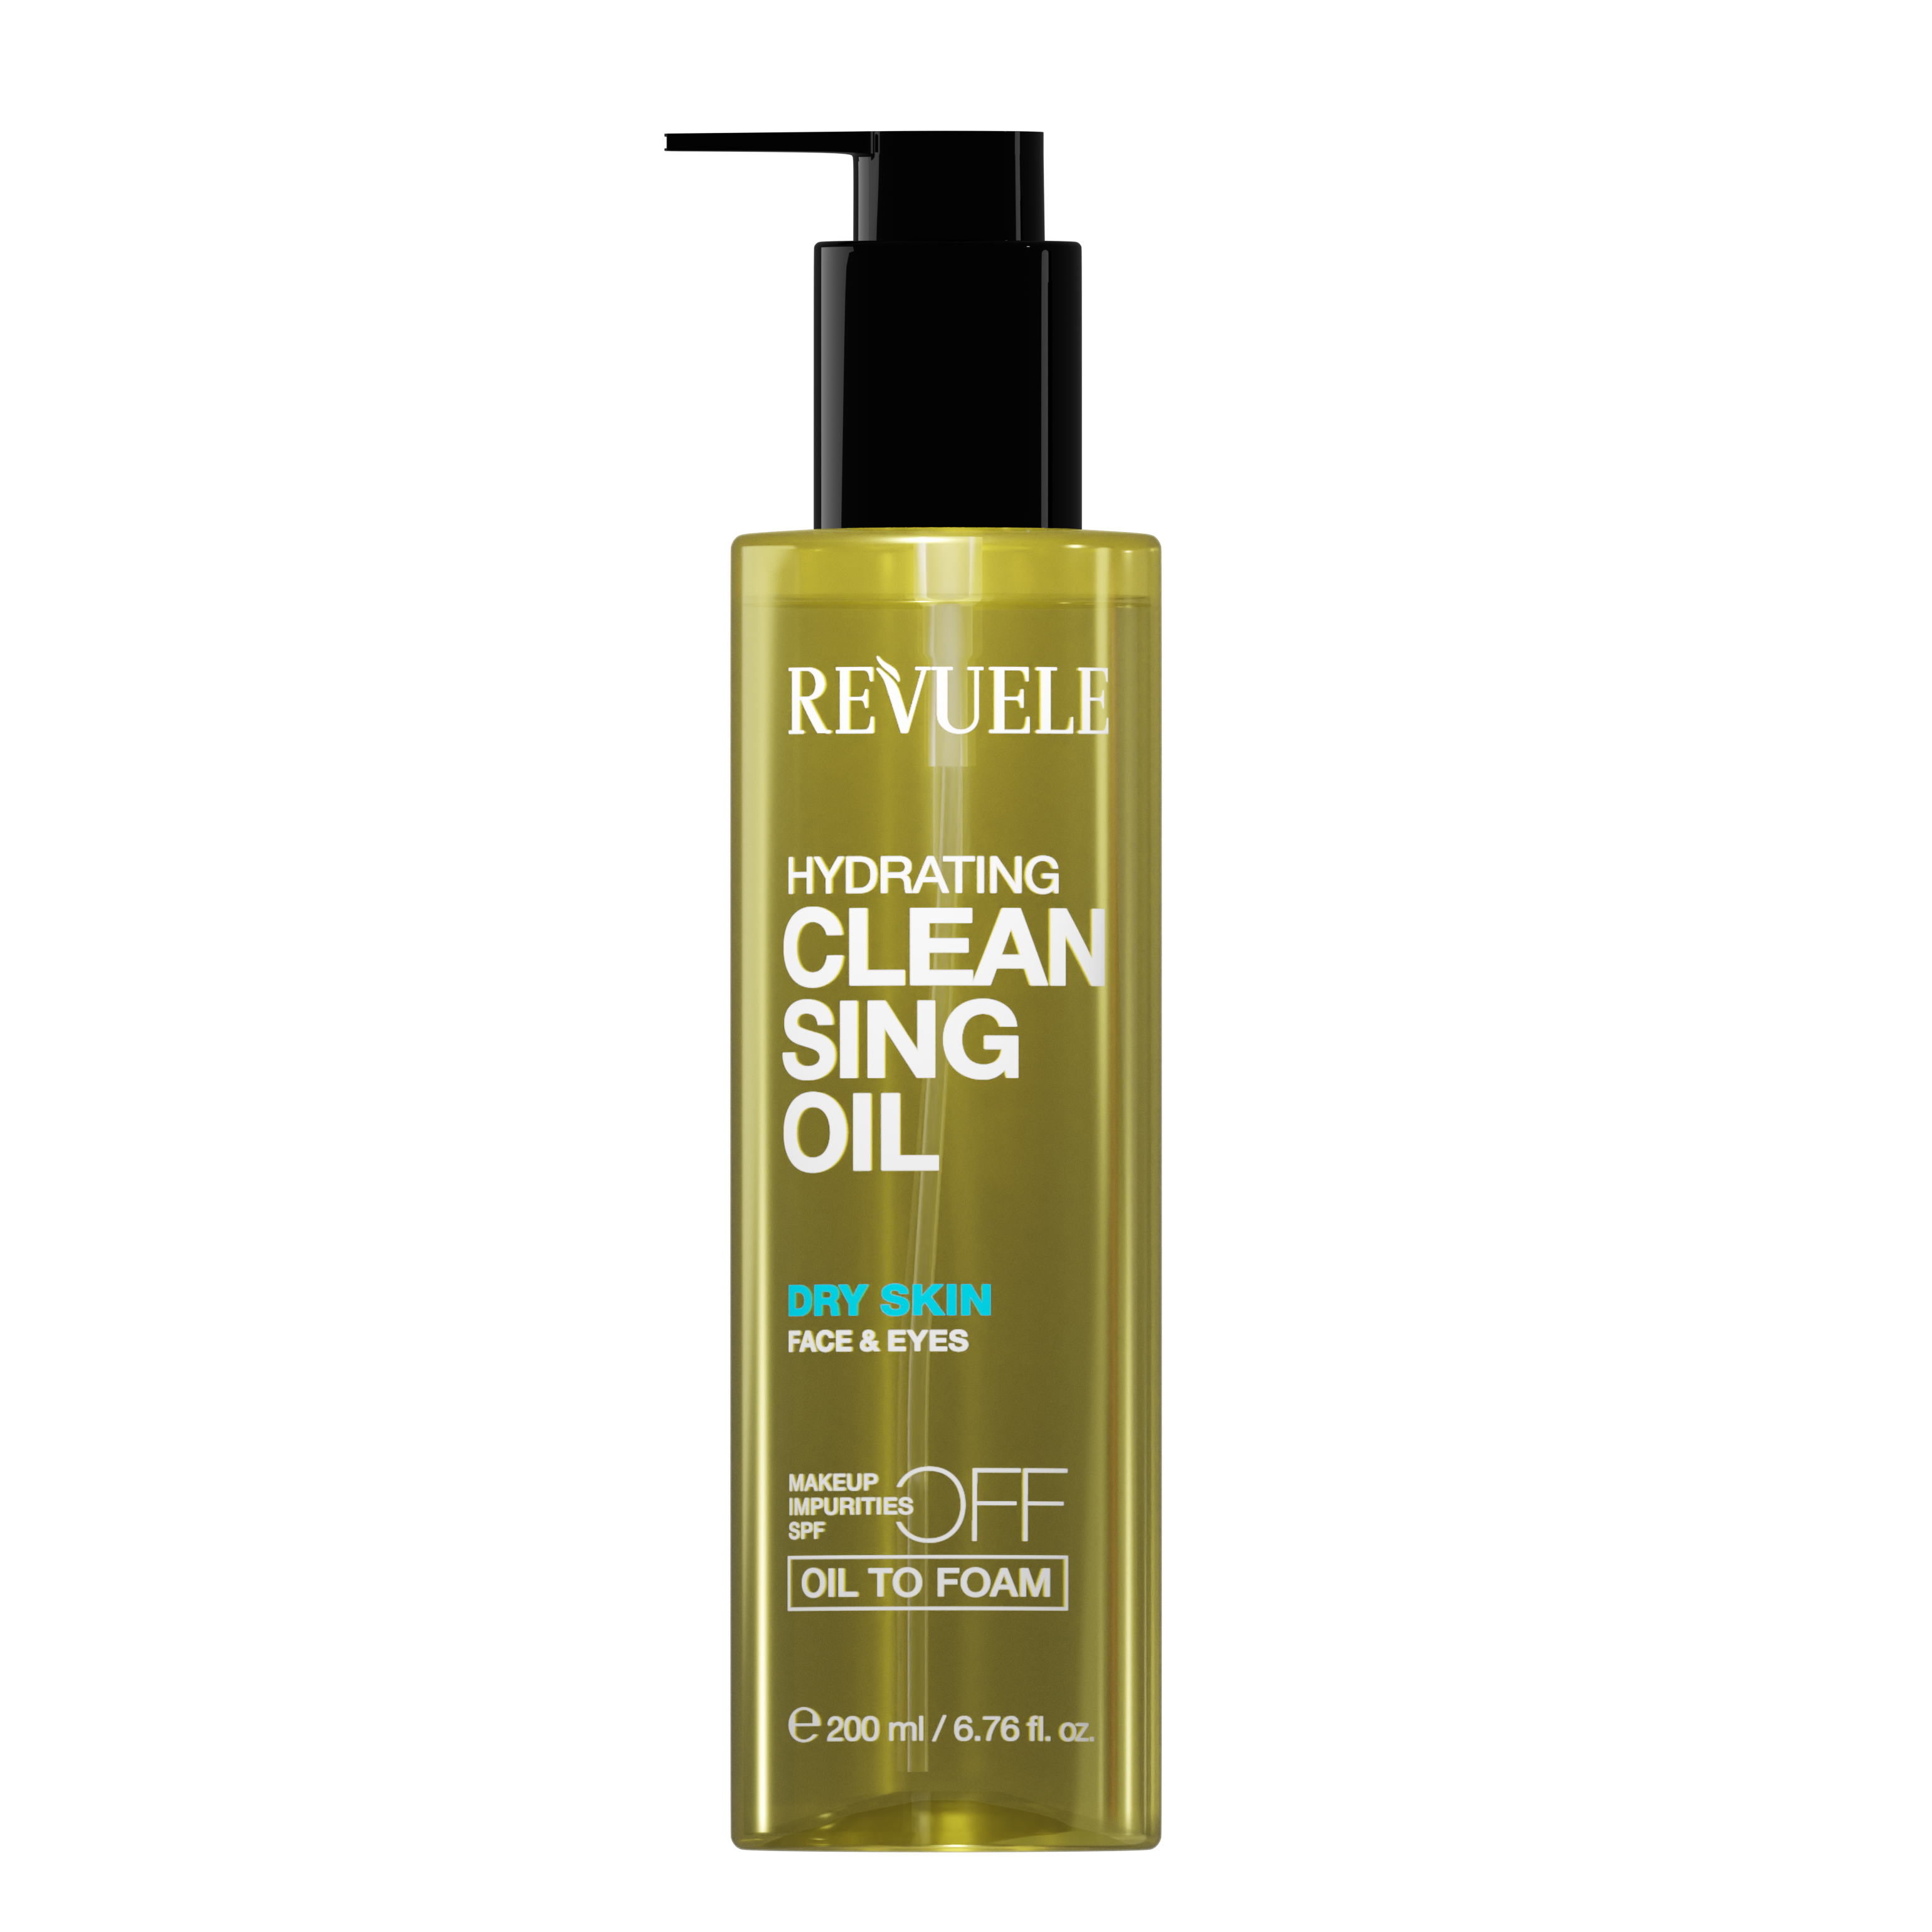 Revuele Hydrating cleansing oil